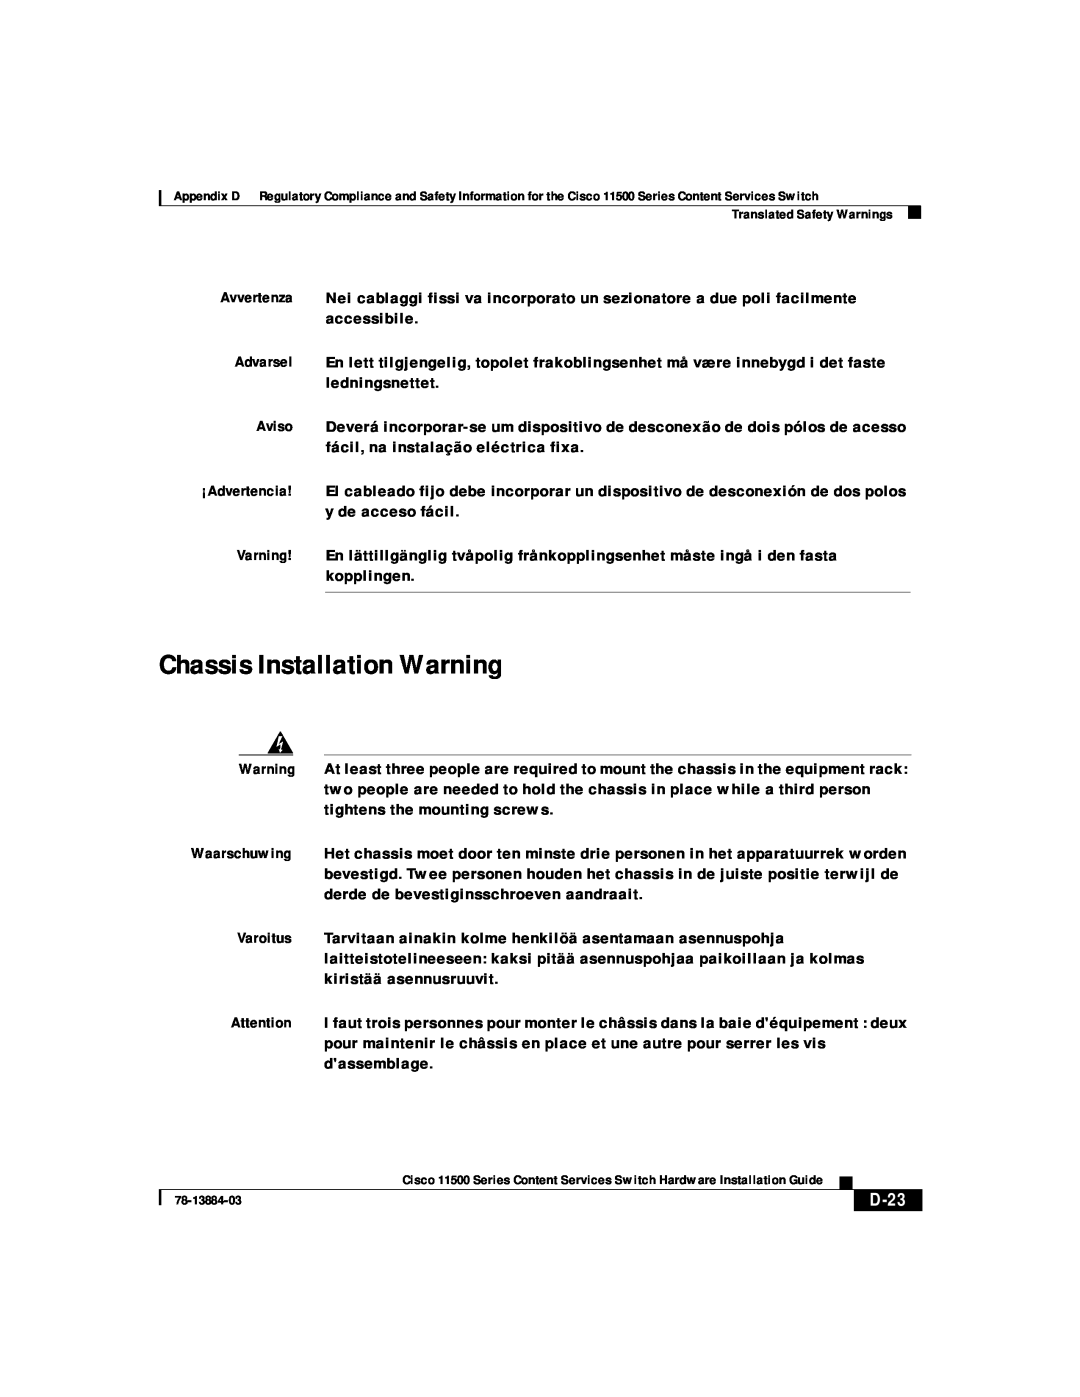 Cisco Systems 11500 Series manual Chassis Installation Warning, D-23 